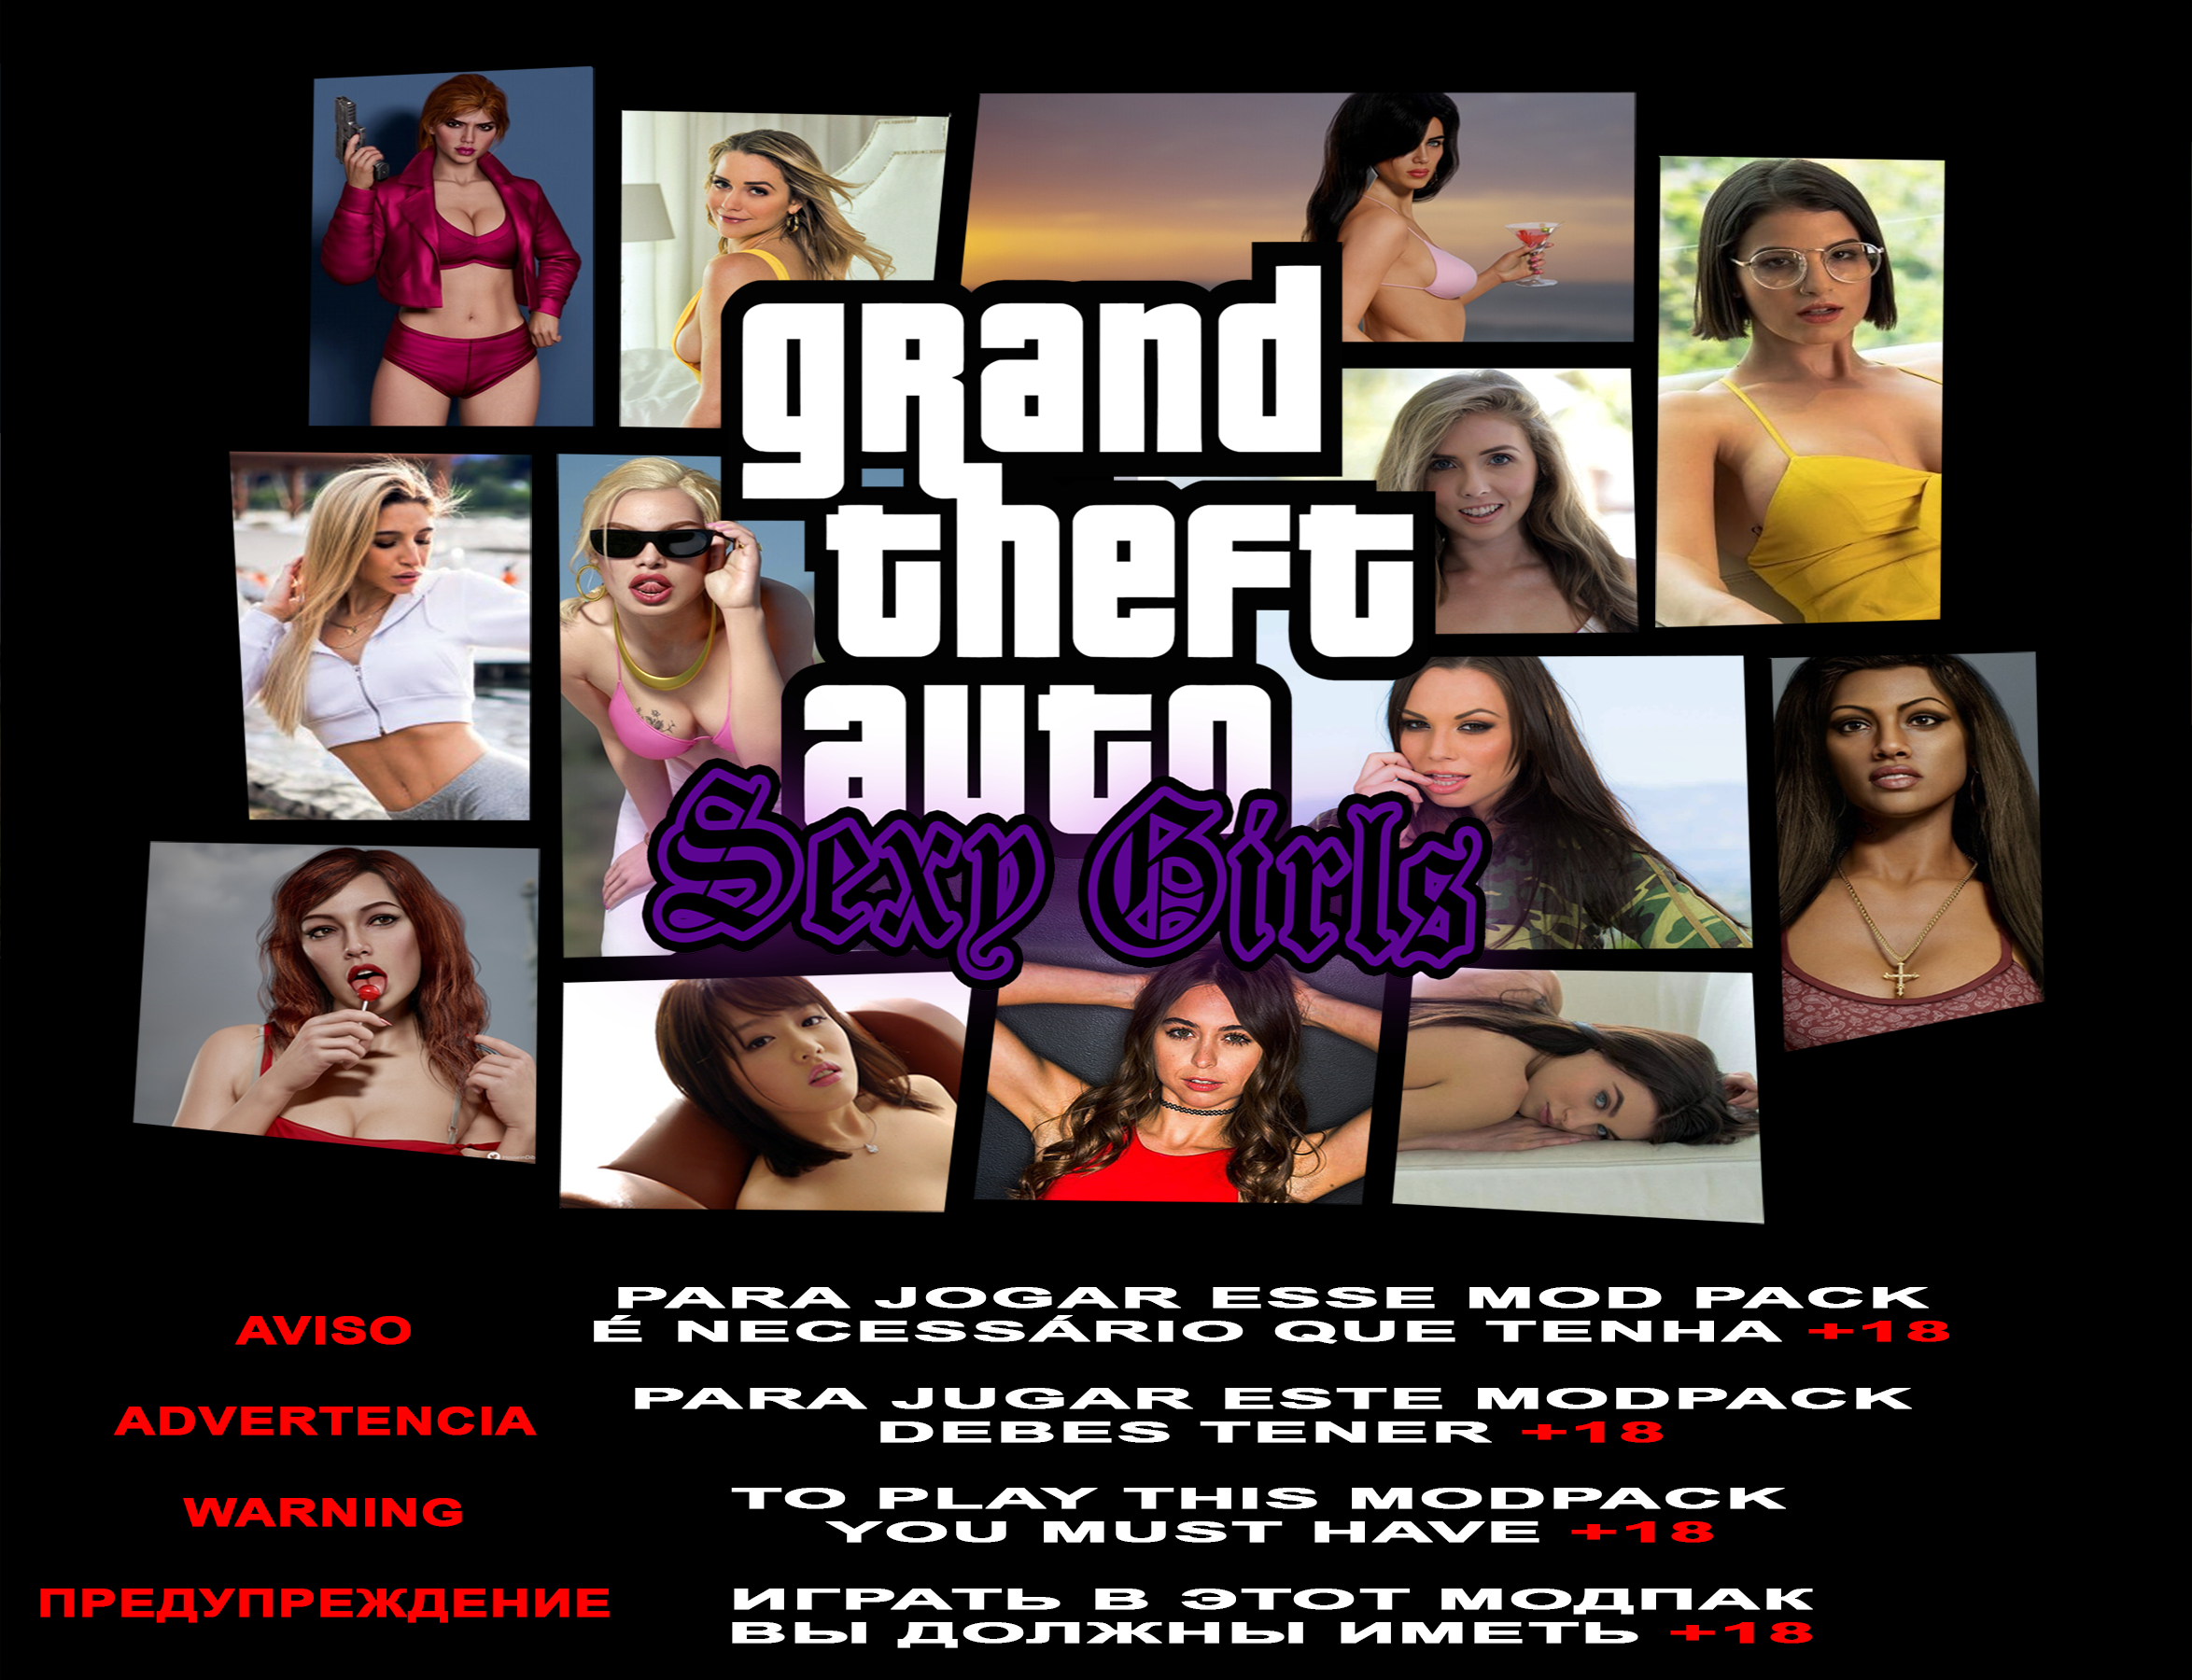 Grand Theft Auto San Andreas Adult Mods - Adult Gaming image image